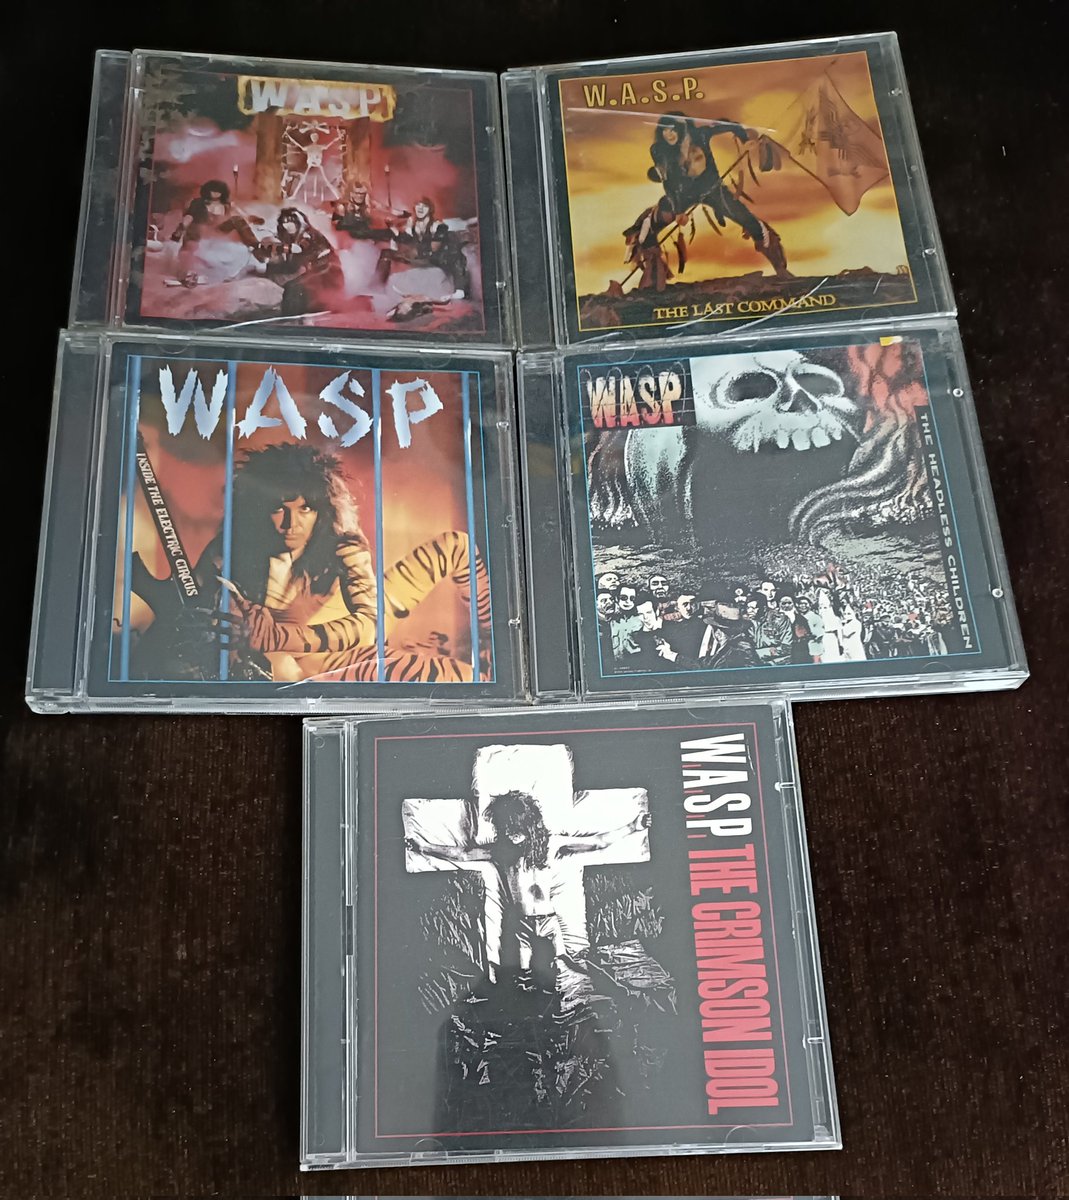 Got to love the first five W.A.S.P. albums

From the rawness of an all time great debut to the change in style on Headless and Crimson there's much to enjoy here 

It may be Blackie's band but Chris Holmes is underrated 

#WASP #HeavyMetal #Rock #BlackieLawless #ChrisHolmes